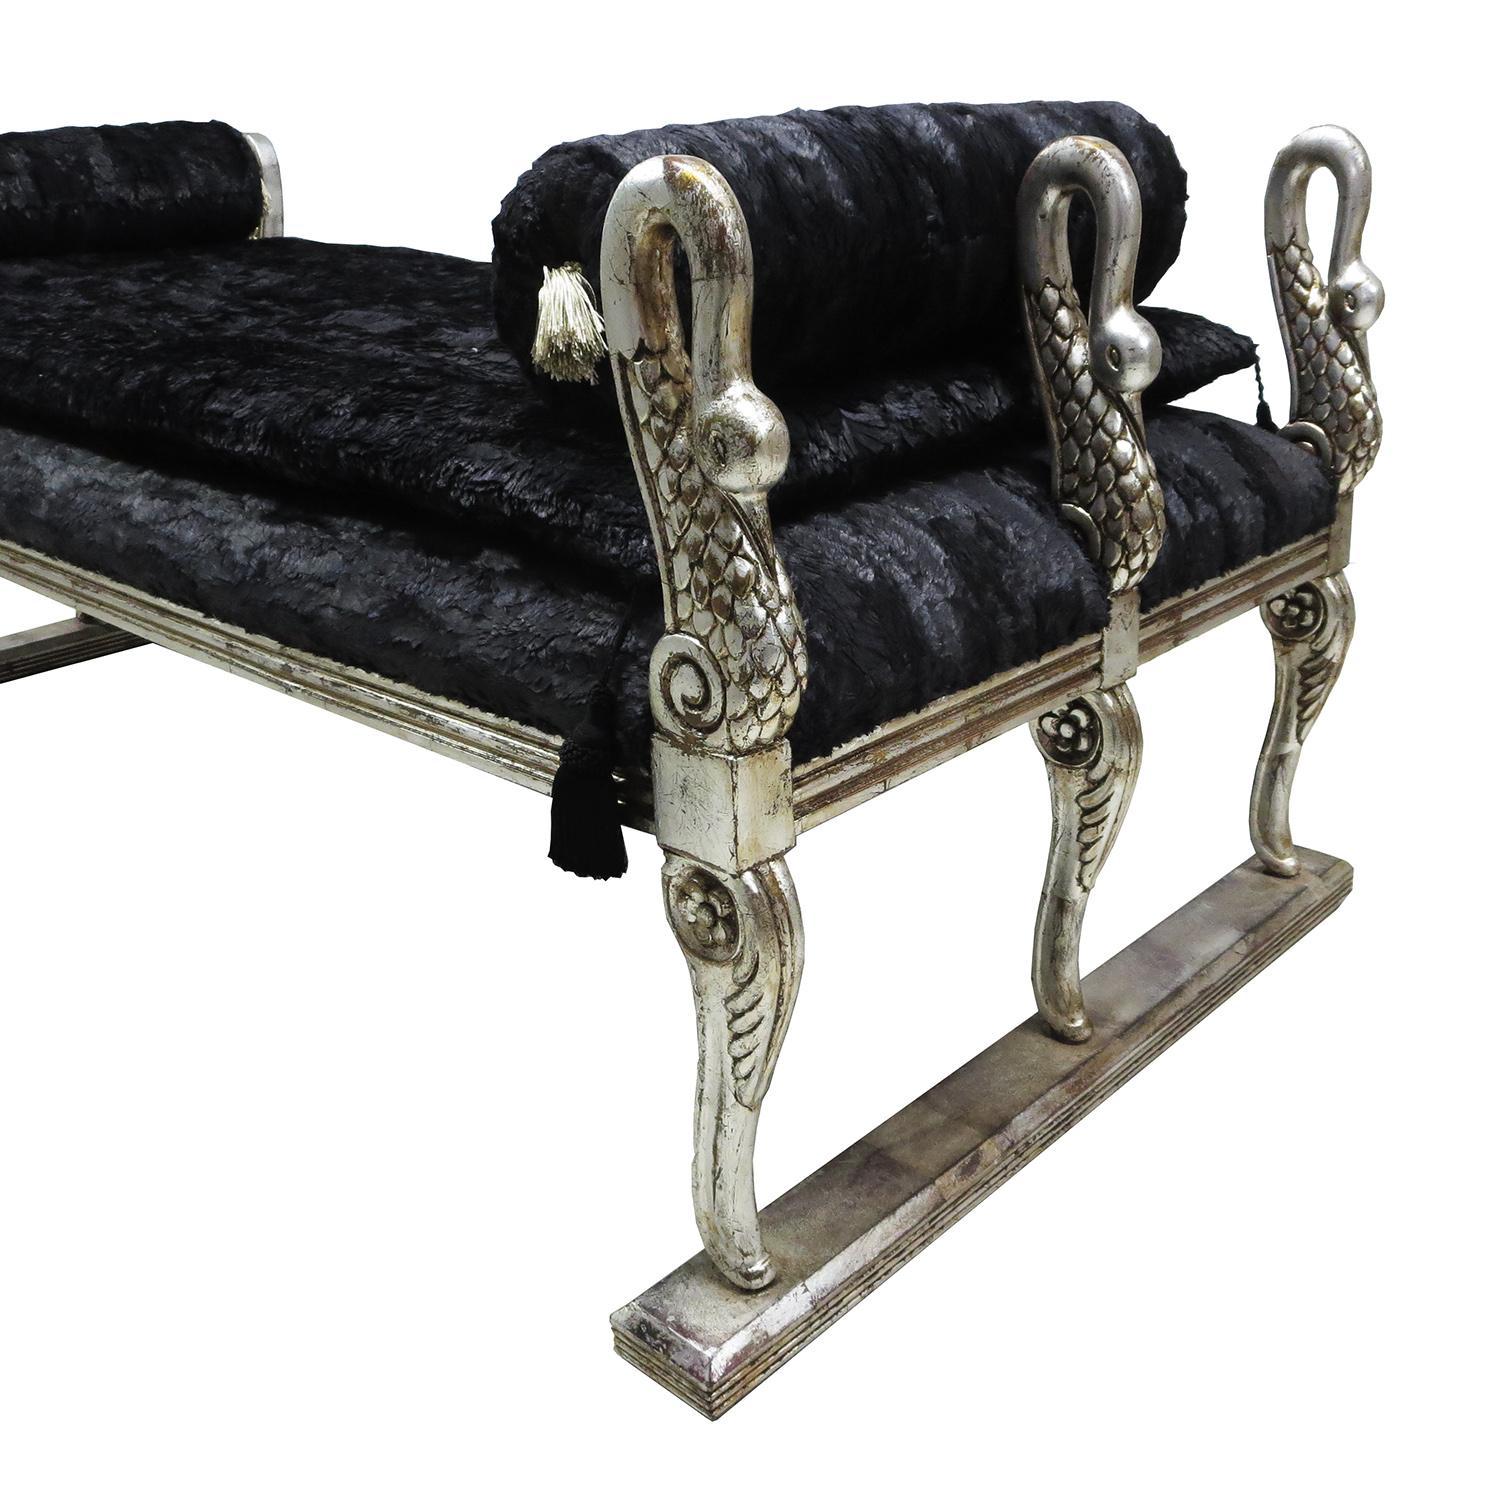 This magnificent 1920s Black Swan Daybed is perfect for your own Game of Thrones! The body of the bed is carved wood, with six exquisite swans. They have been finished in an antiqued silver leaf, to great effect. The bench has been re-upholstered in